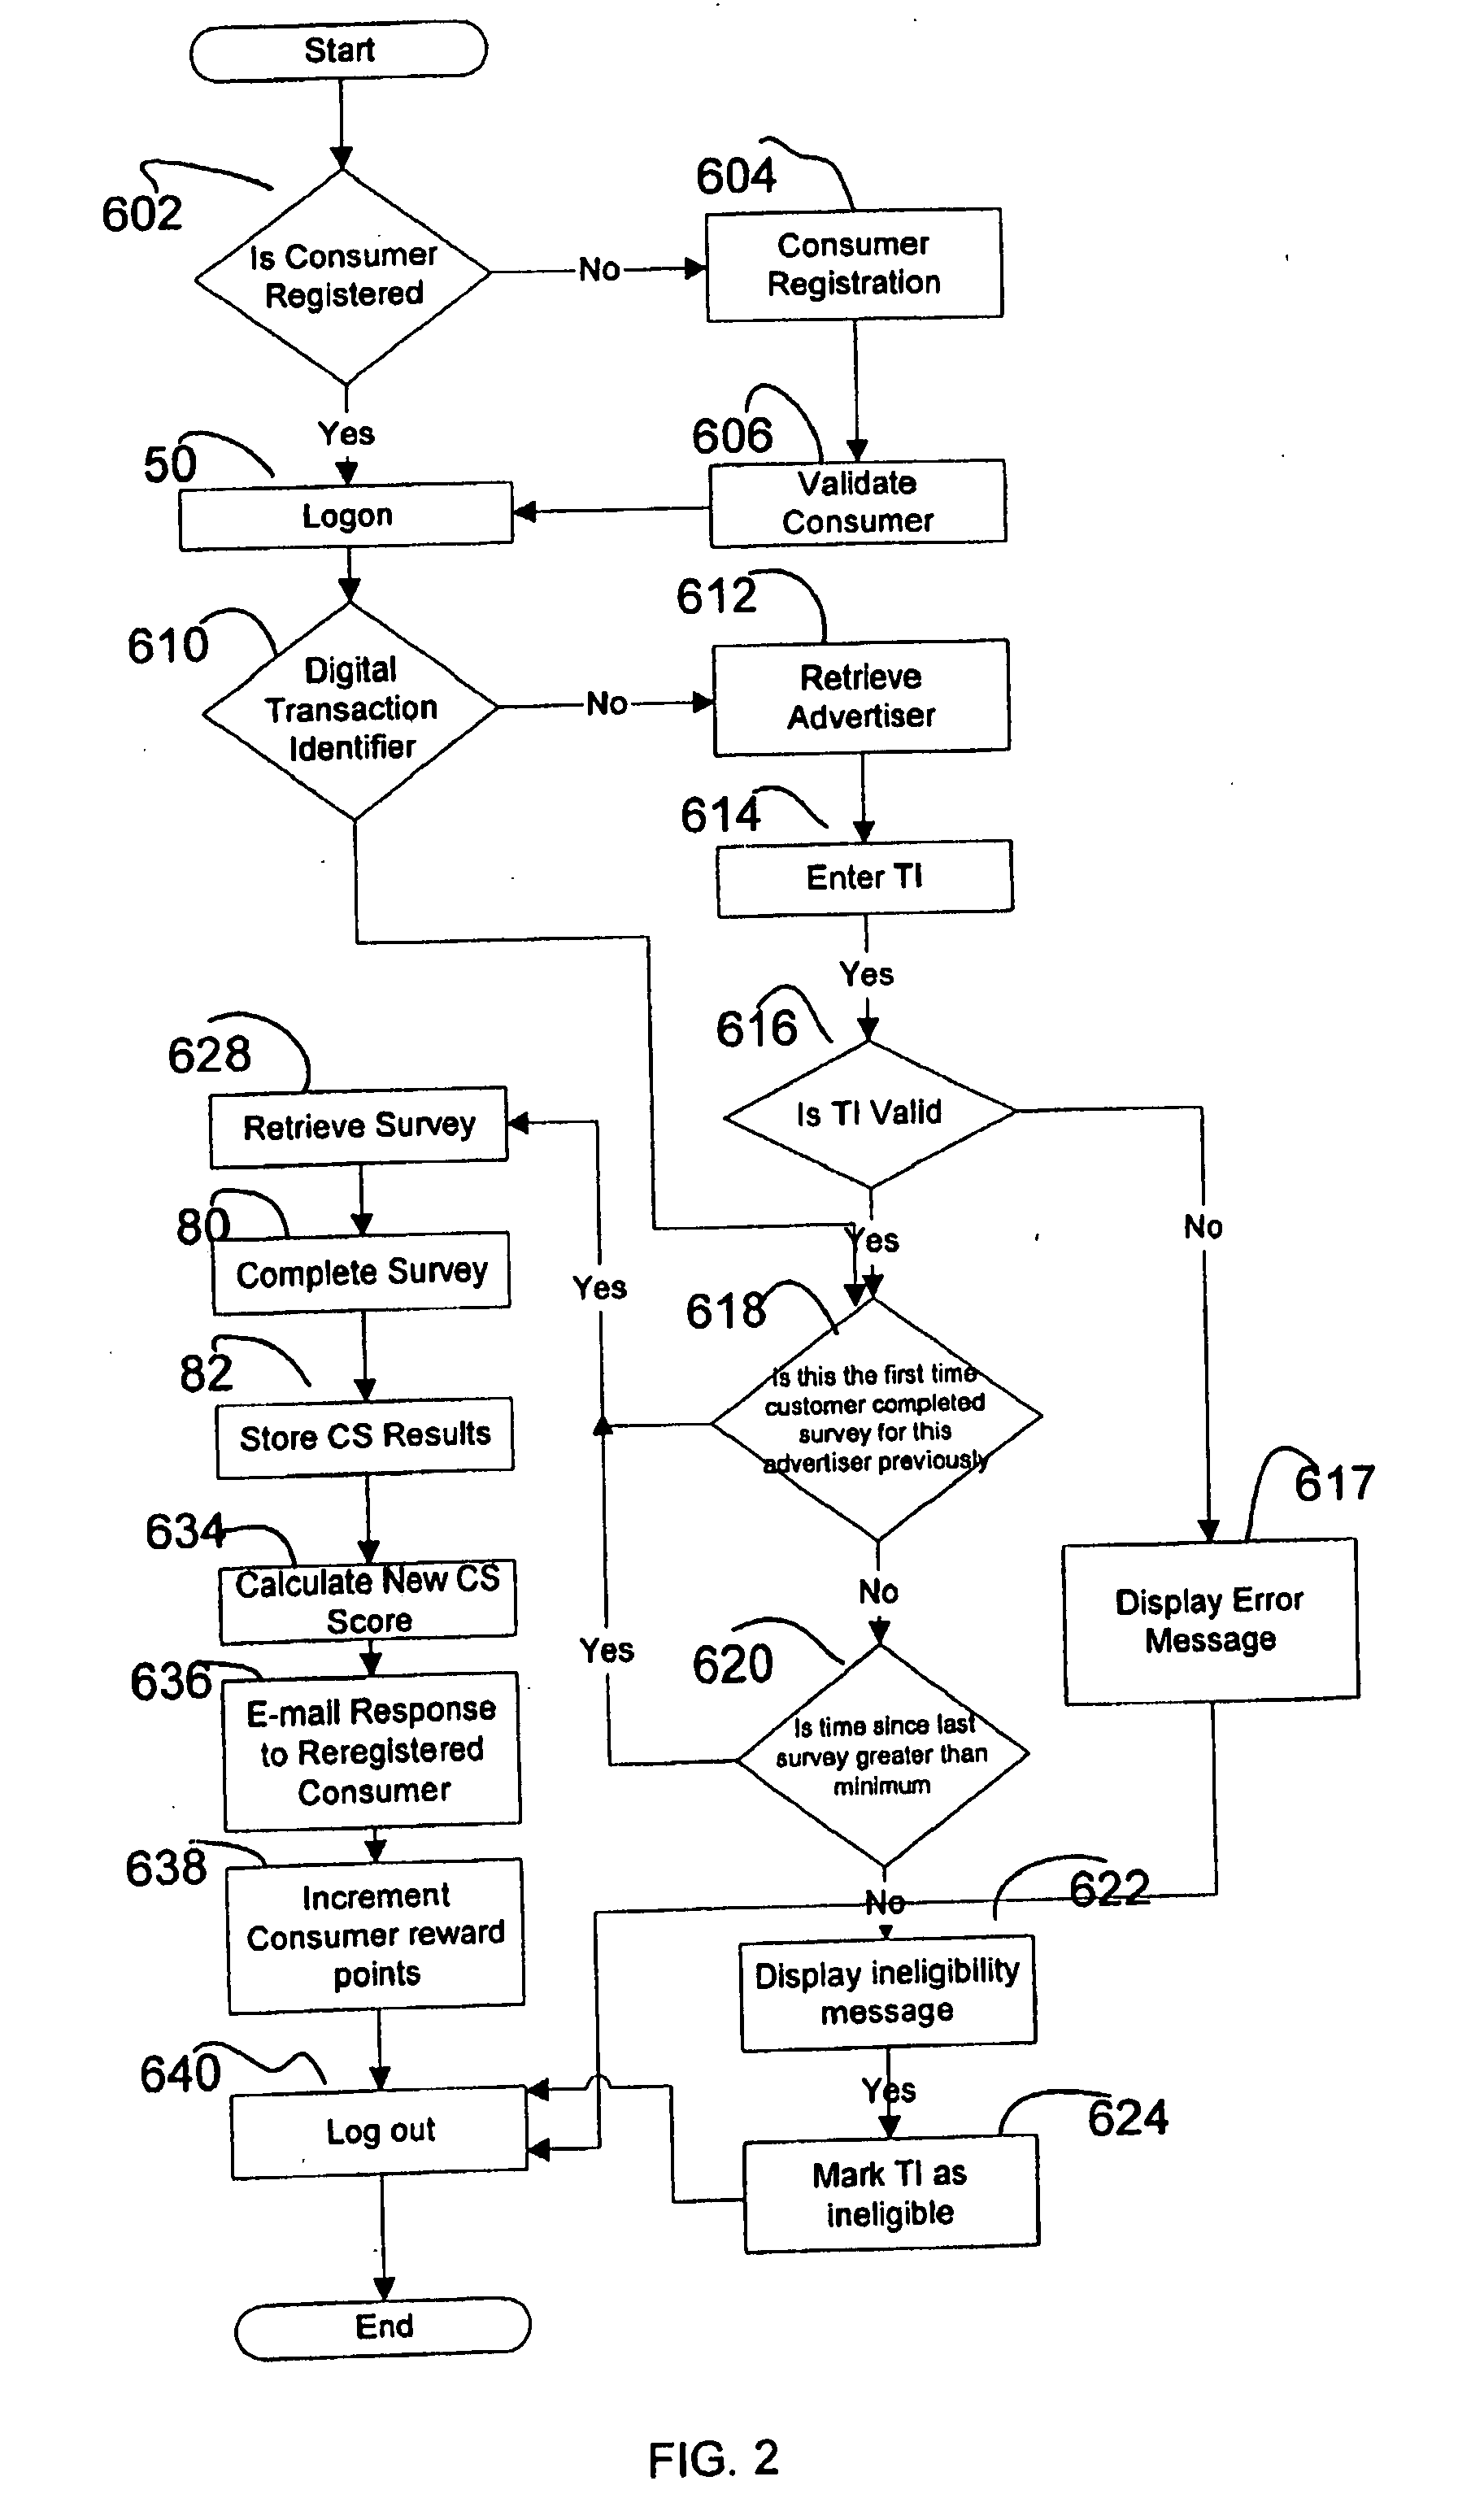 Method and Process for Capturing, Storing, Processing and Displaying Customer Satisfaction Information